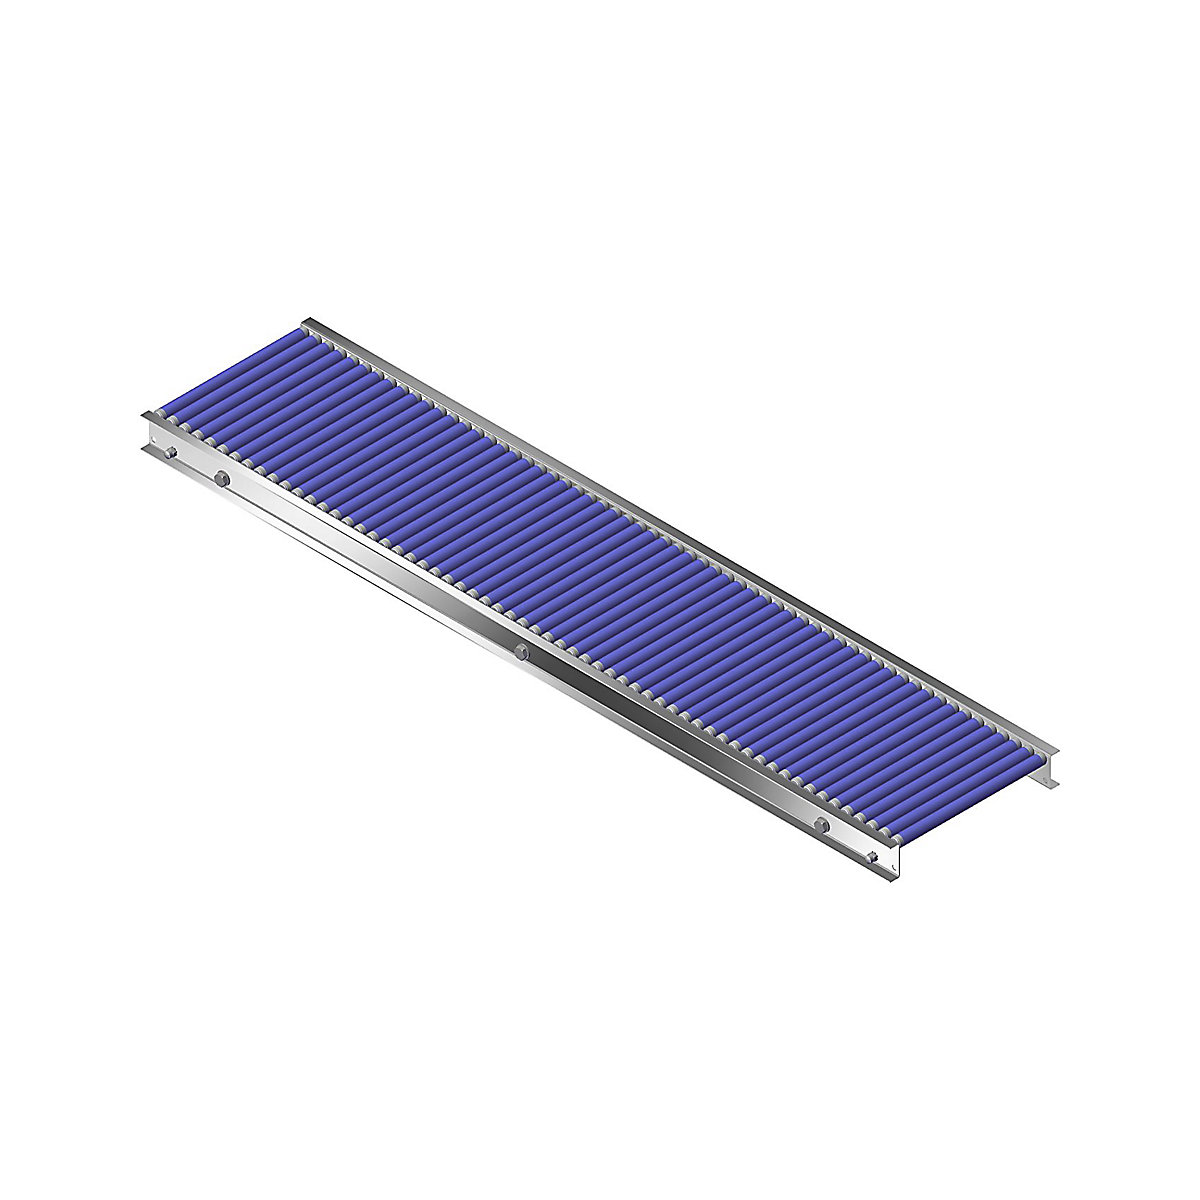 Gura – Small roller conveyor, aluminium frame with plastic rollers, track width 300 mm, axle spacing 25 mm, length 1.5 m